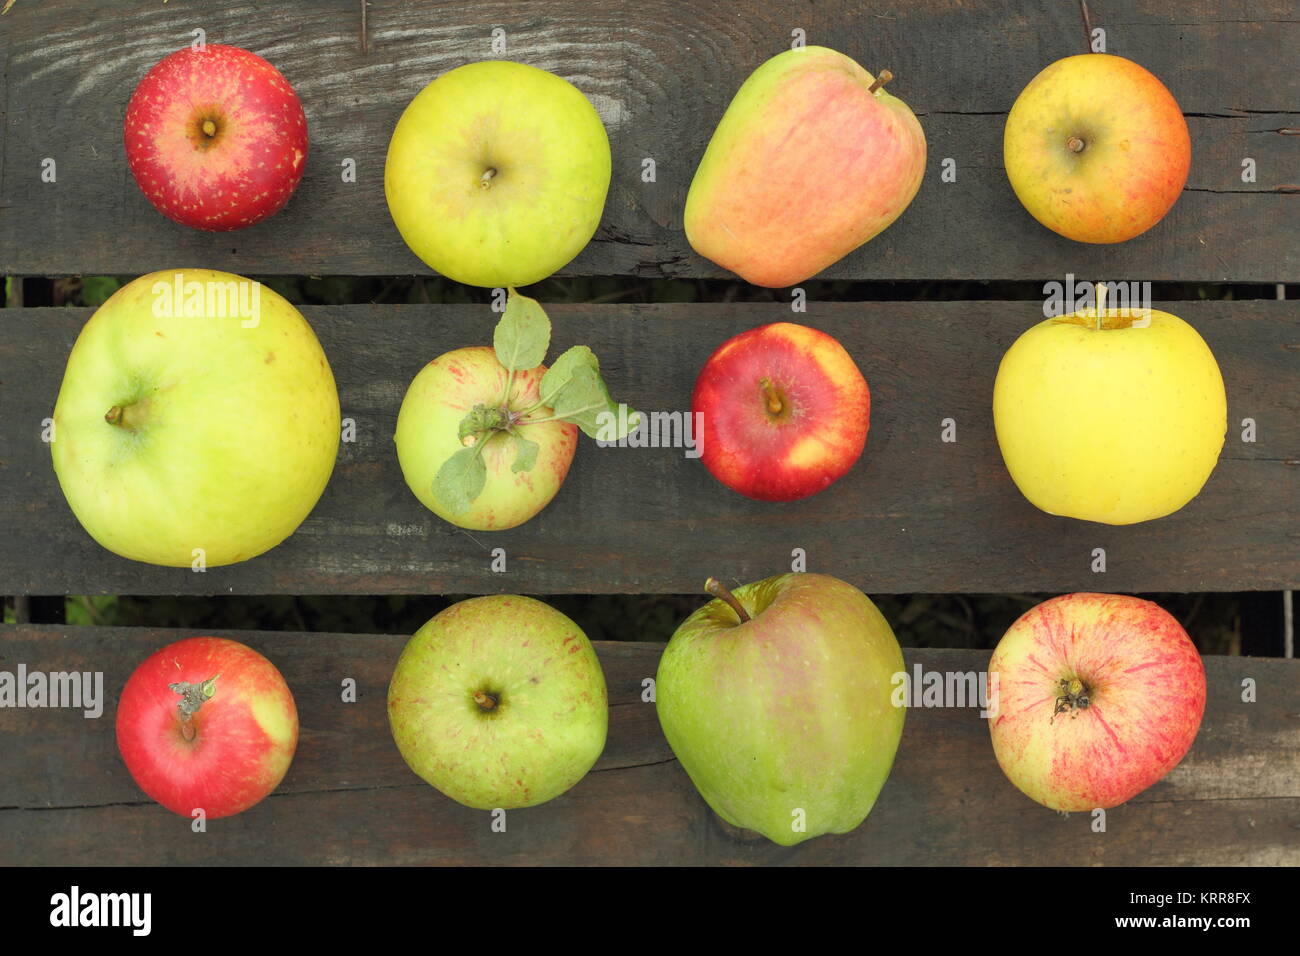 British apple varieties (malus domestica) on a crate in an English orchard in late summer (October), UK. Stock Photo